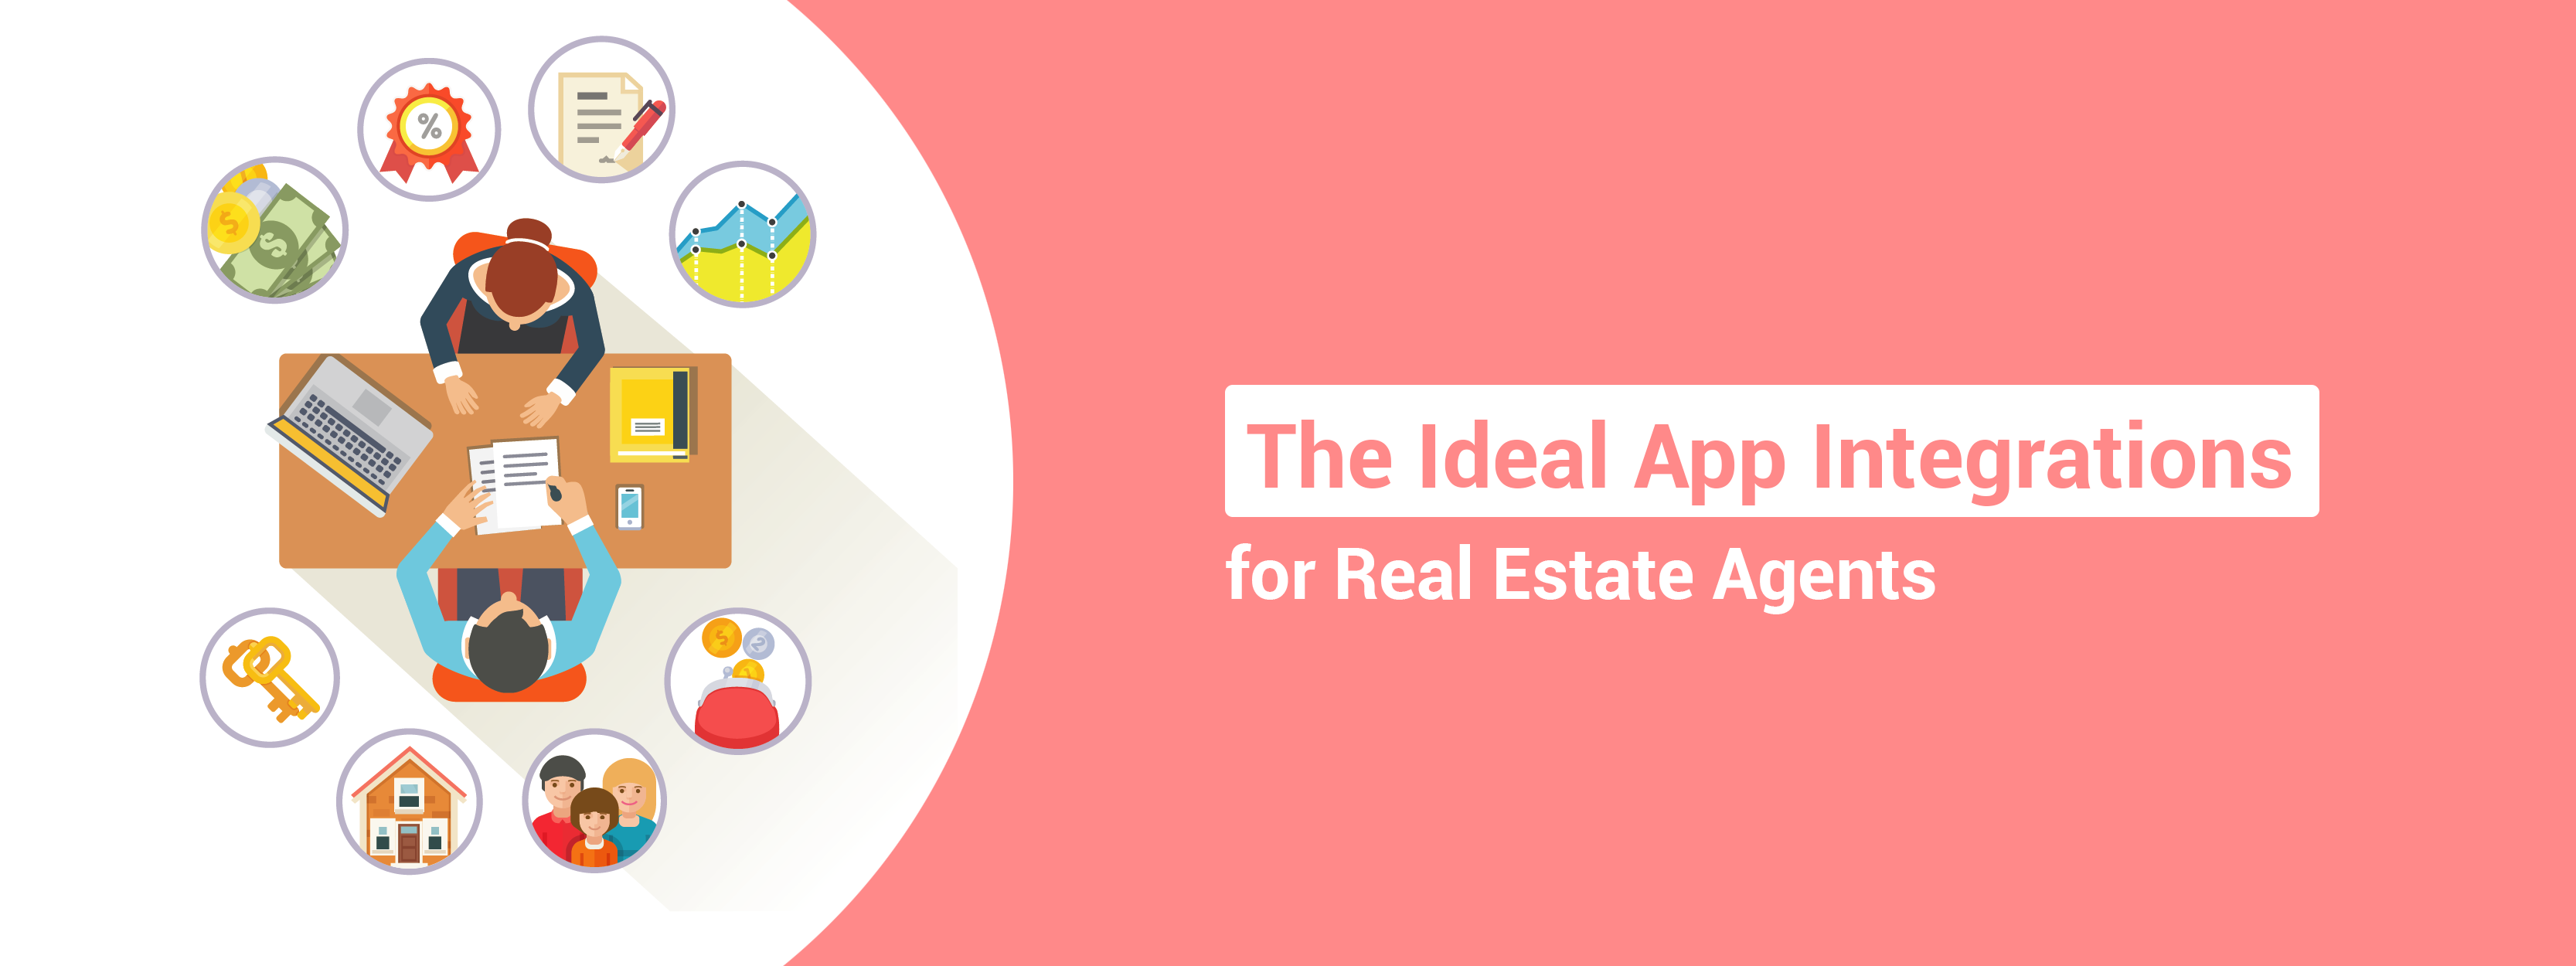 the ideal app integration for real esrare agents